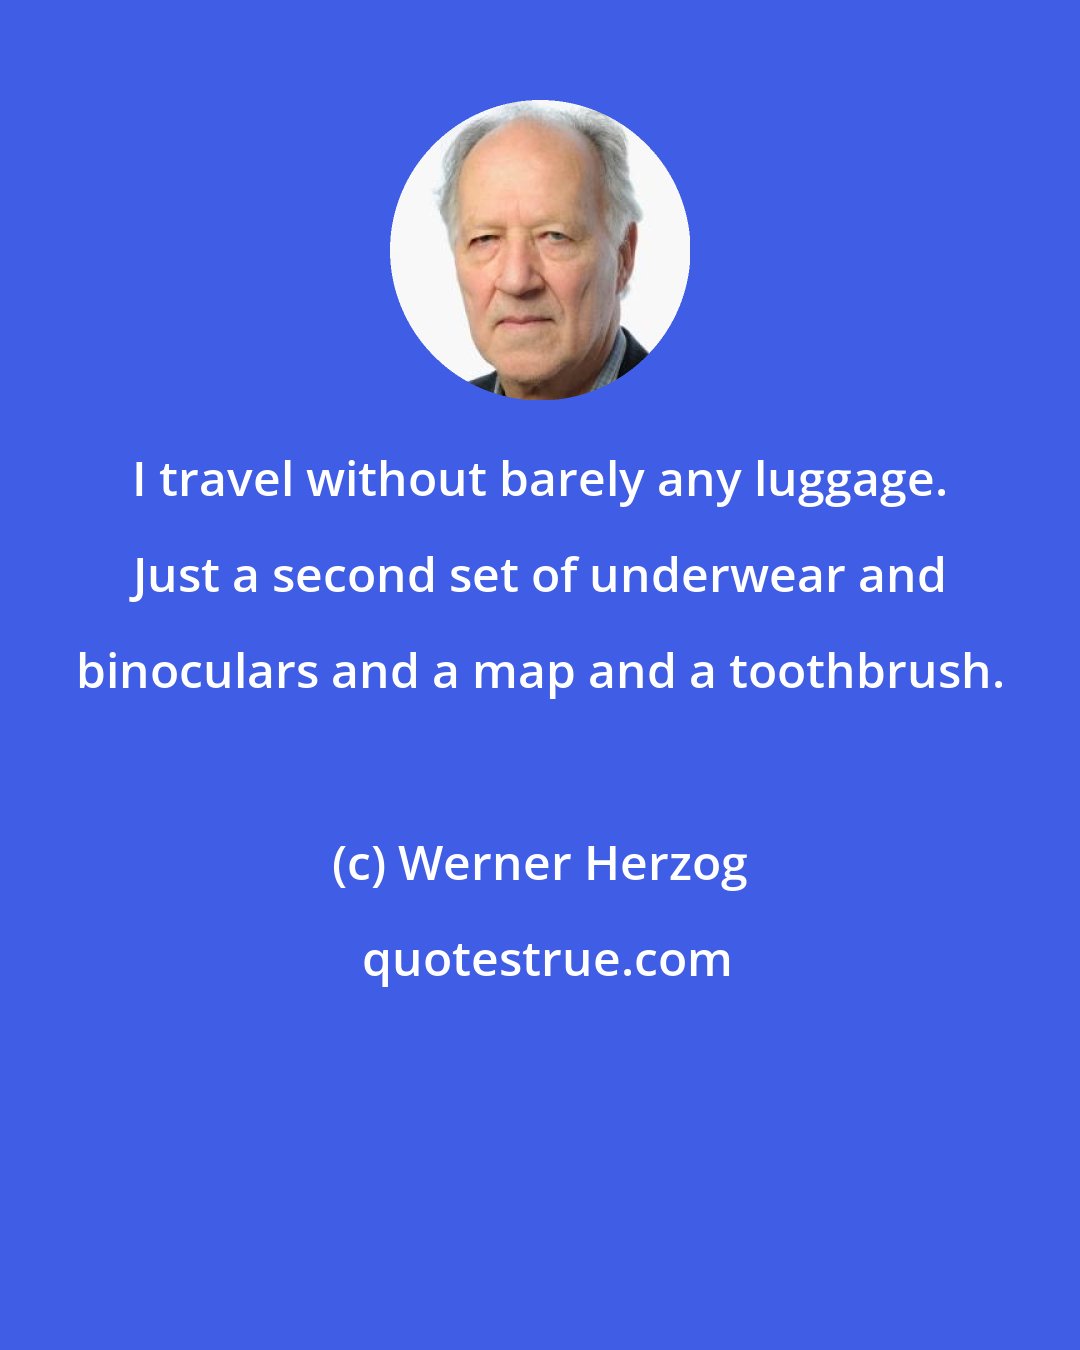 Werner Herzog: I travel without barely any luggage. Just a second set of underwear and binoculars and a map and a toothbrush.